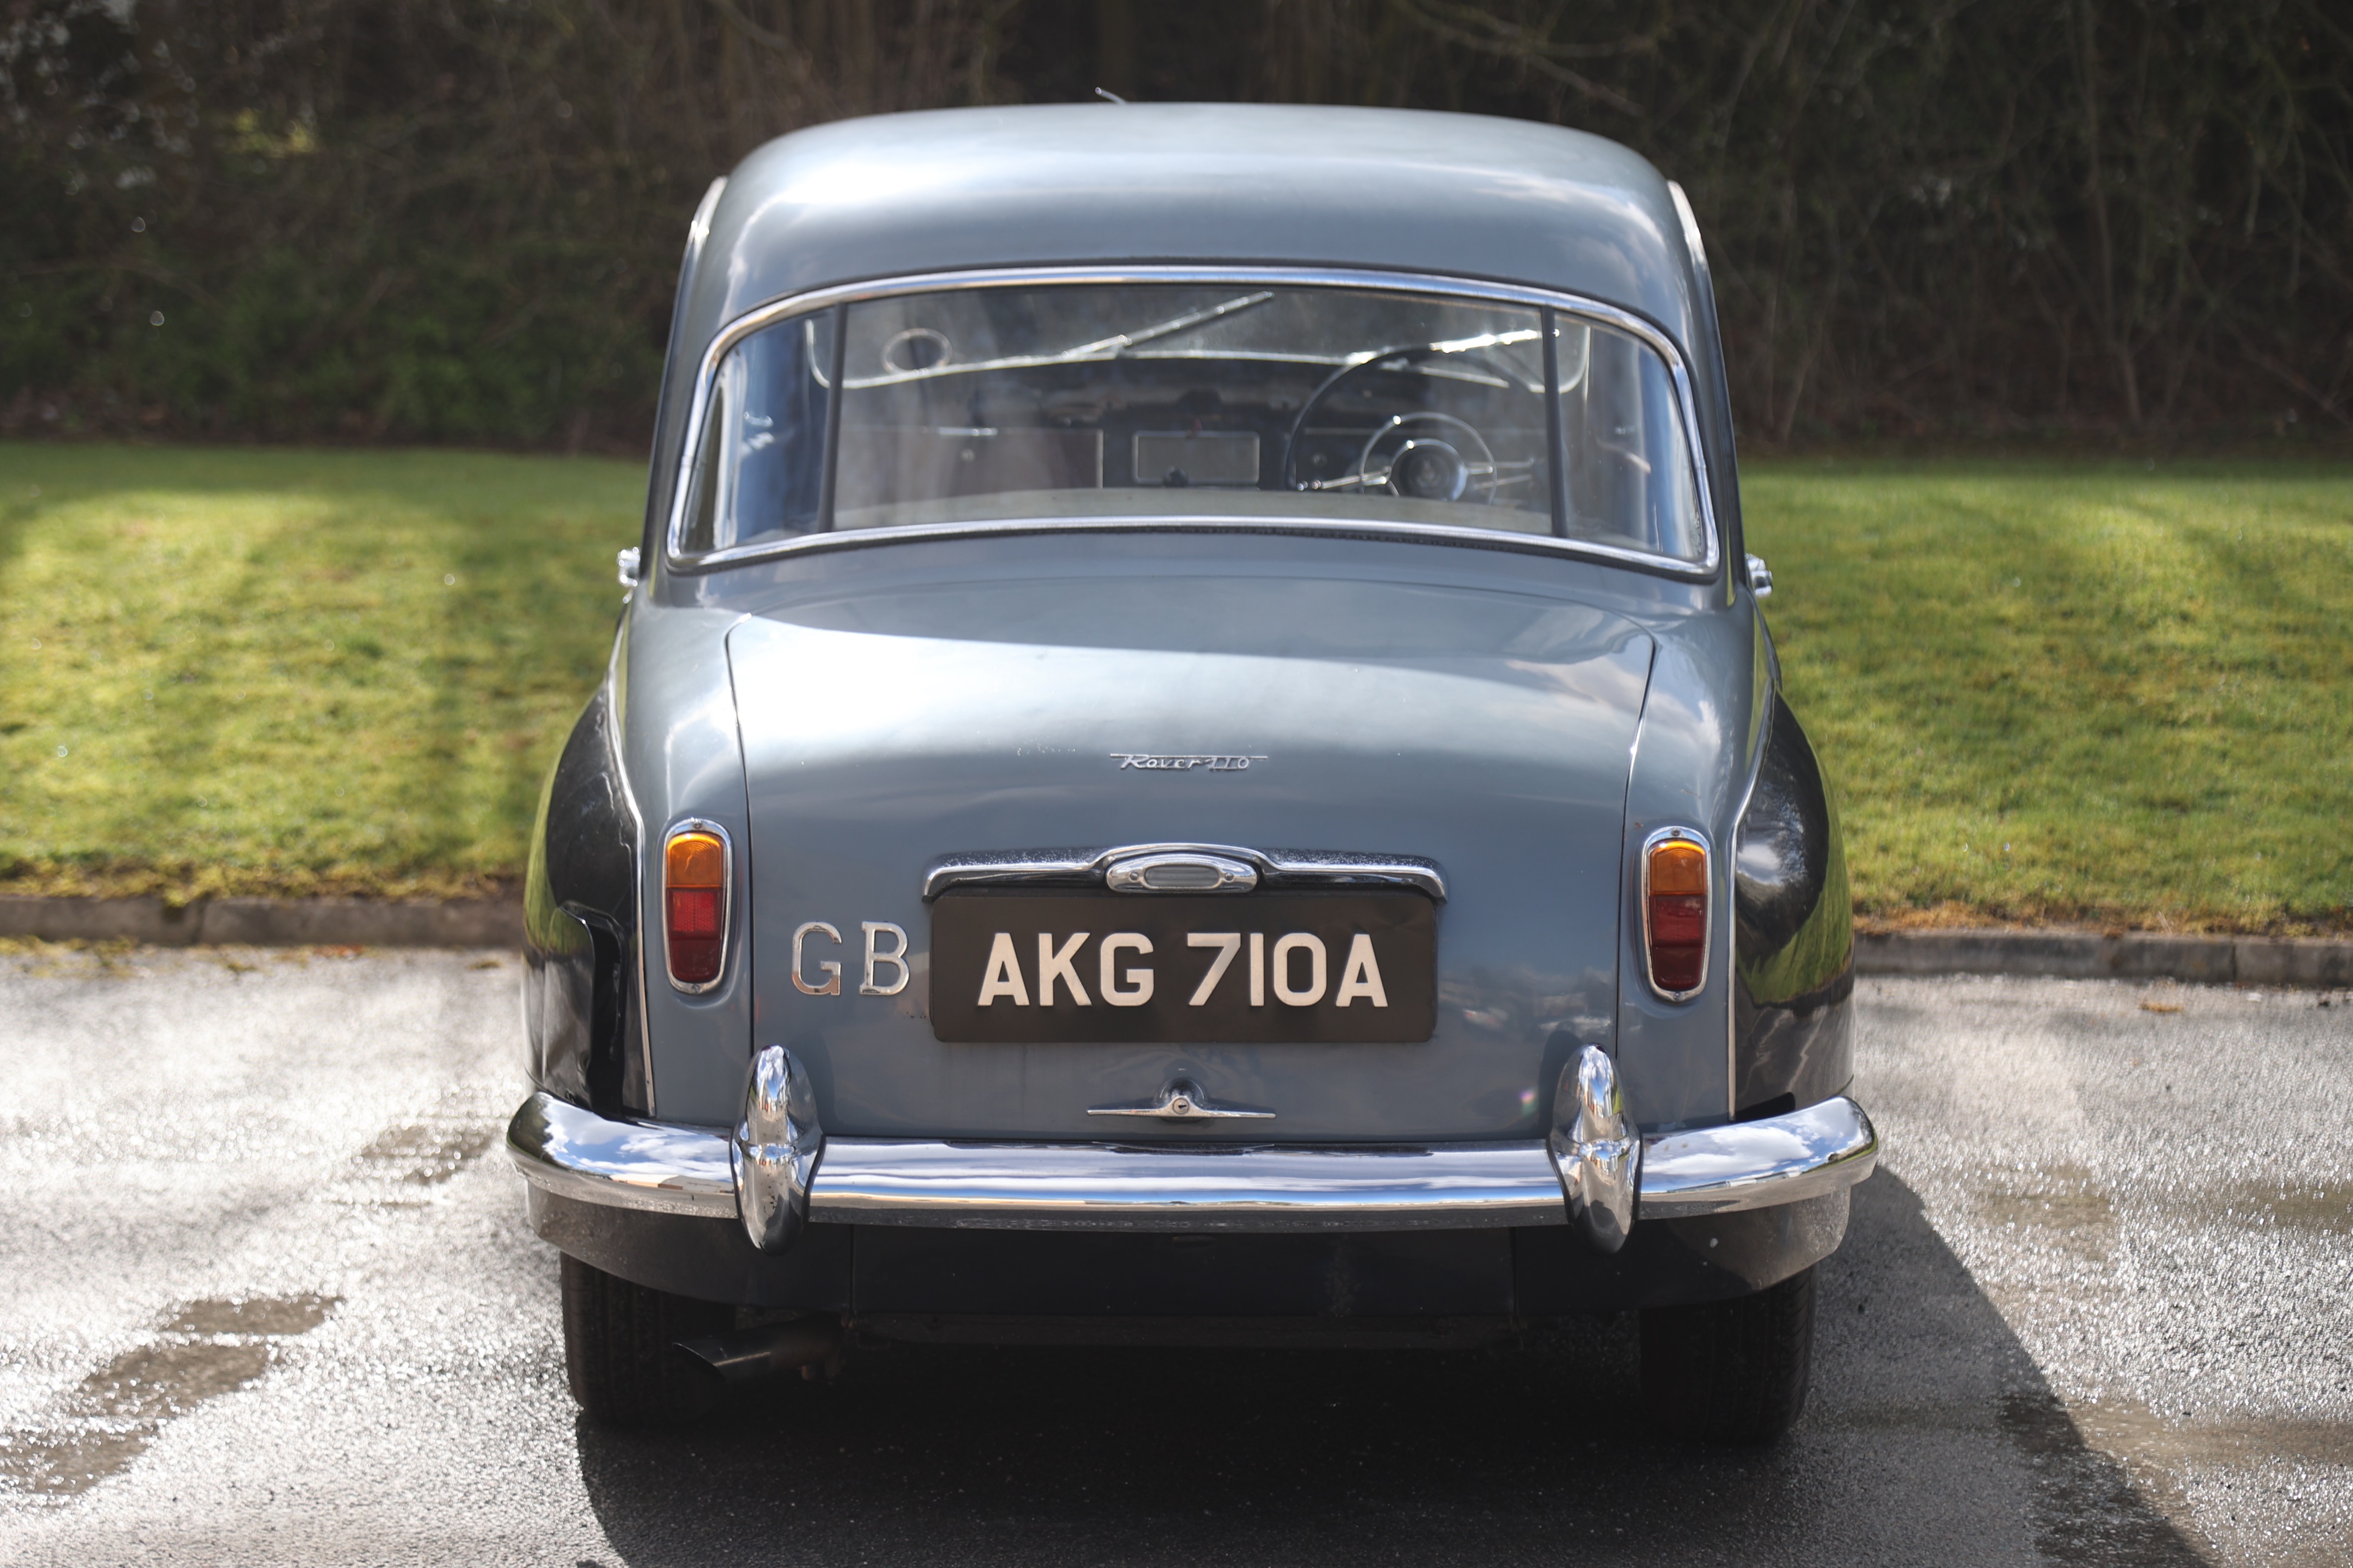 Lot 59 1963 Rover P4 110 Saloon